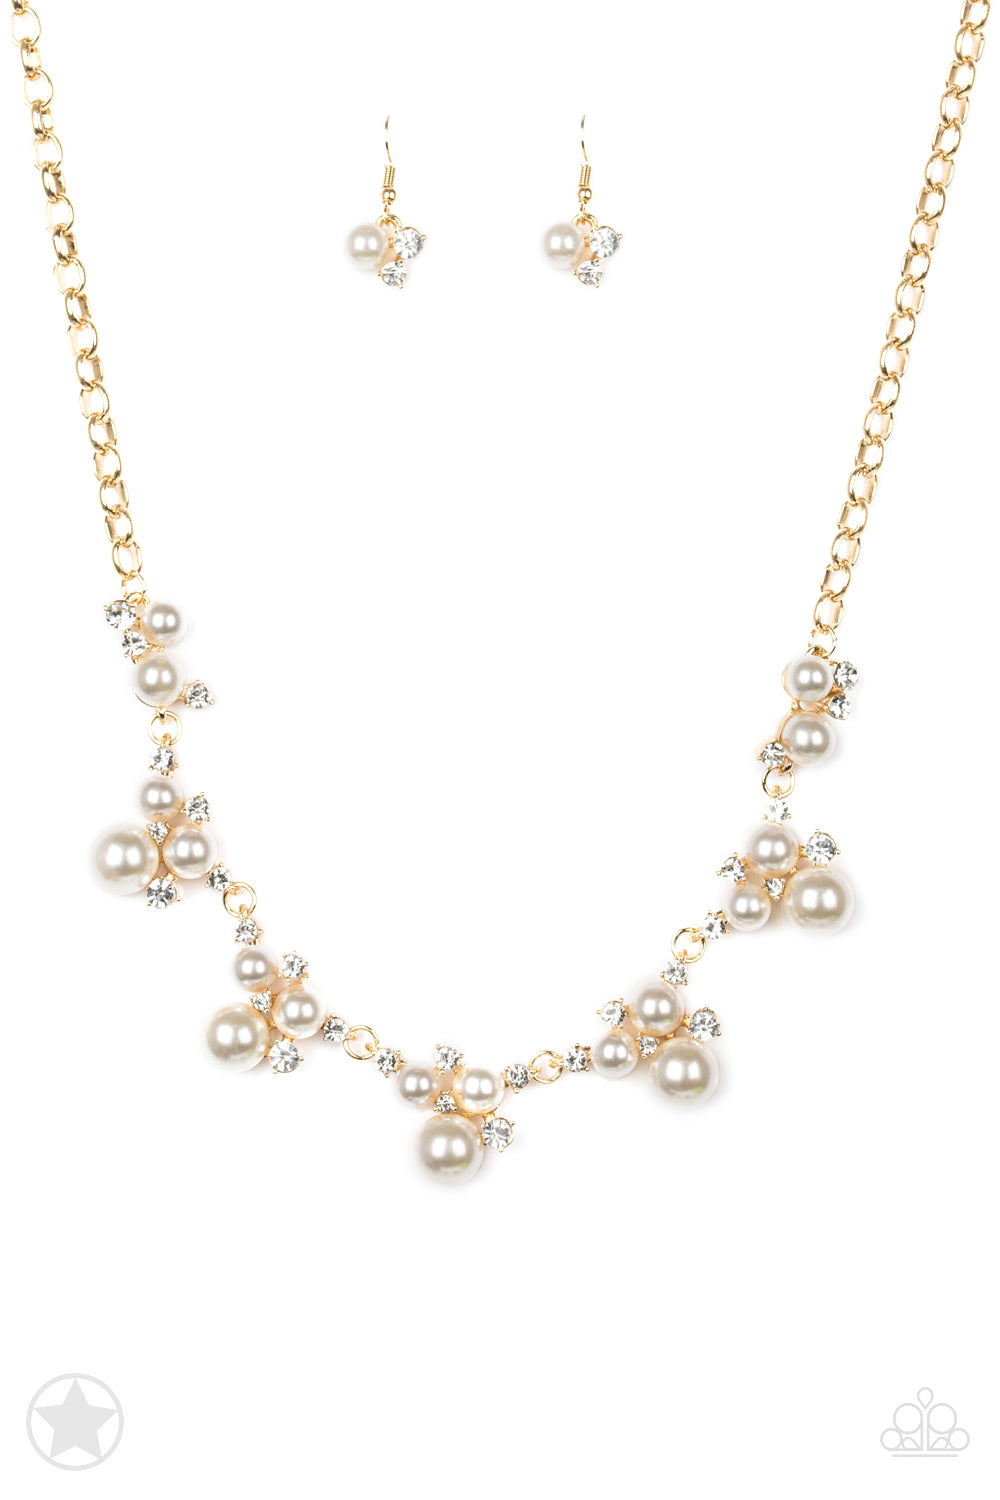 Clusters of pearls and dazzling white rhinestones join below the collar, creating refined frames. Infused with a glistening gold chain, the sections of luminescent frames trickle along the neck in a timeless fashion. Features an adjustable clasp closure.